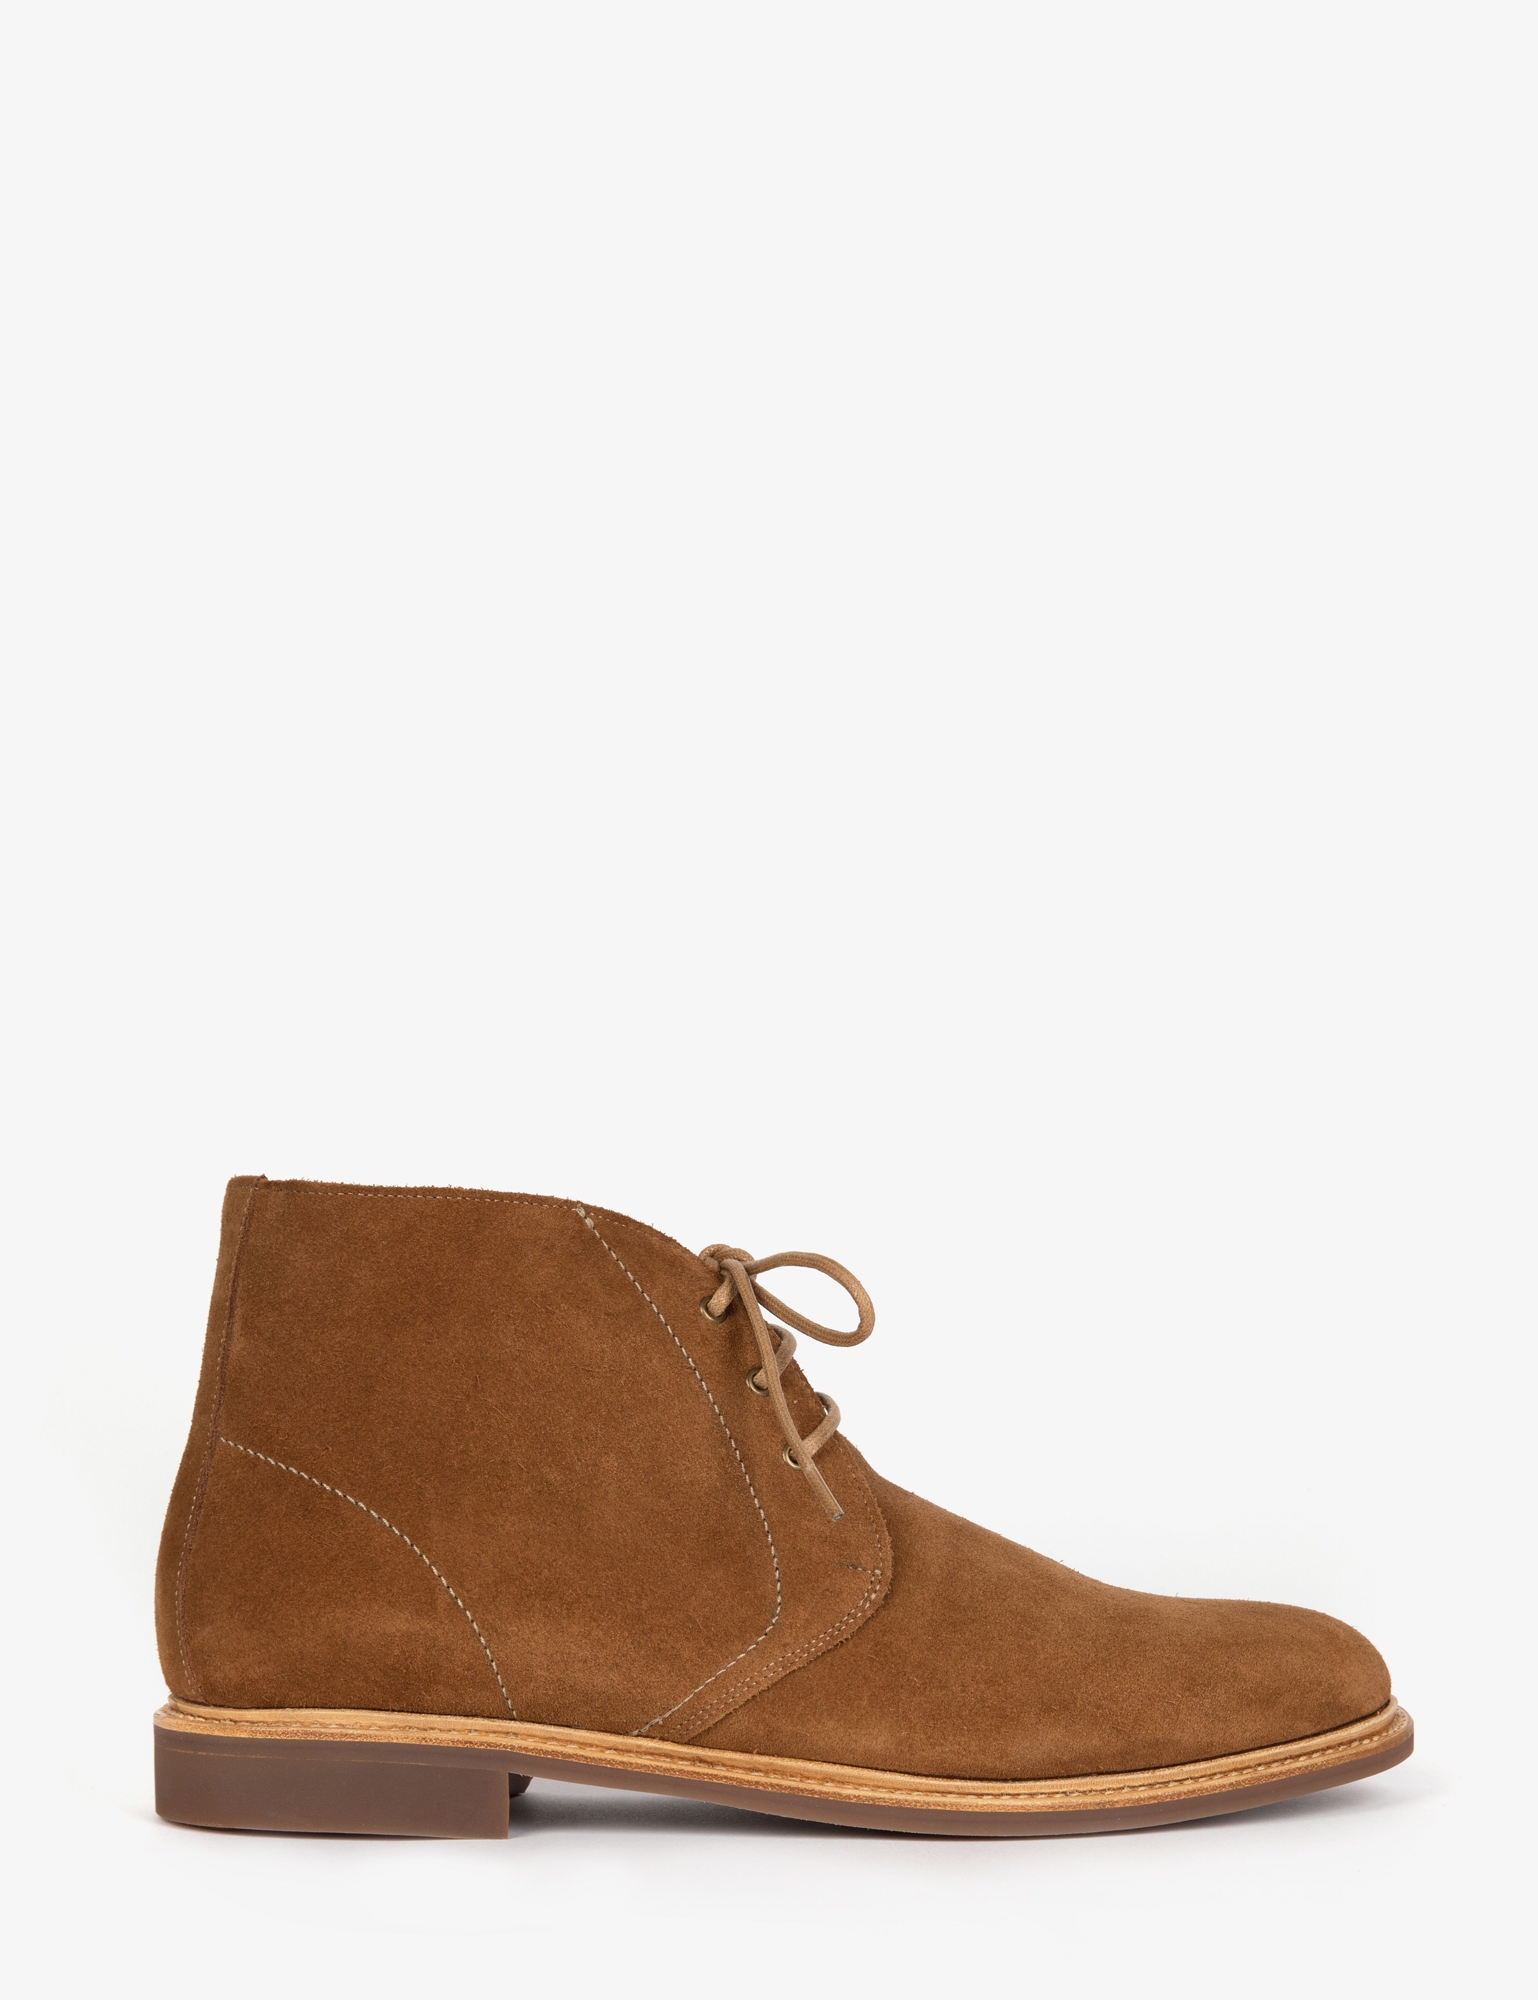 Hastings Suede Chukka Boot-tan | Men's Boot|Penelope Chilvers